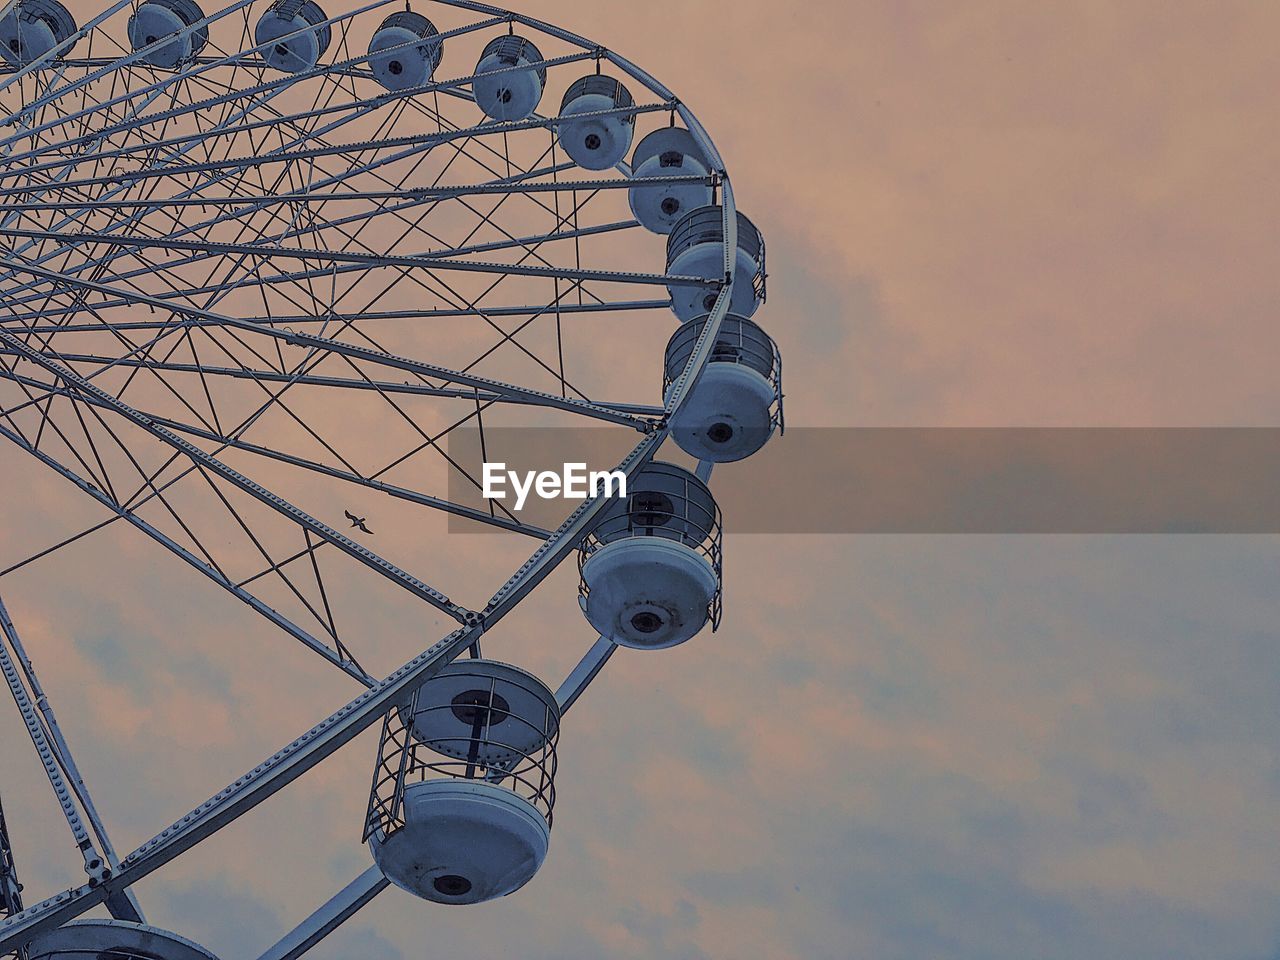 Low angle view of ferris wheel against cloudy sky during sunset